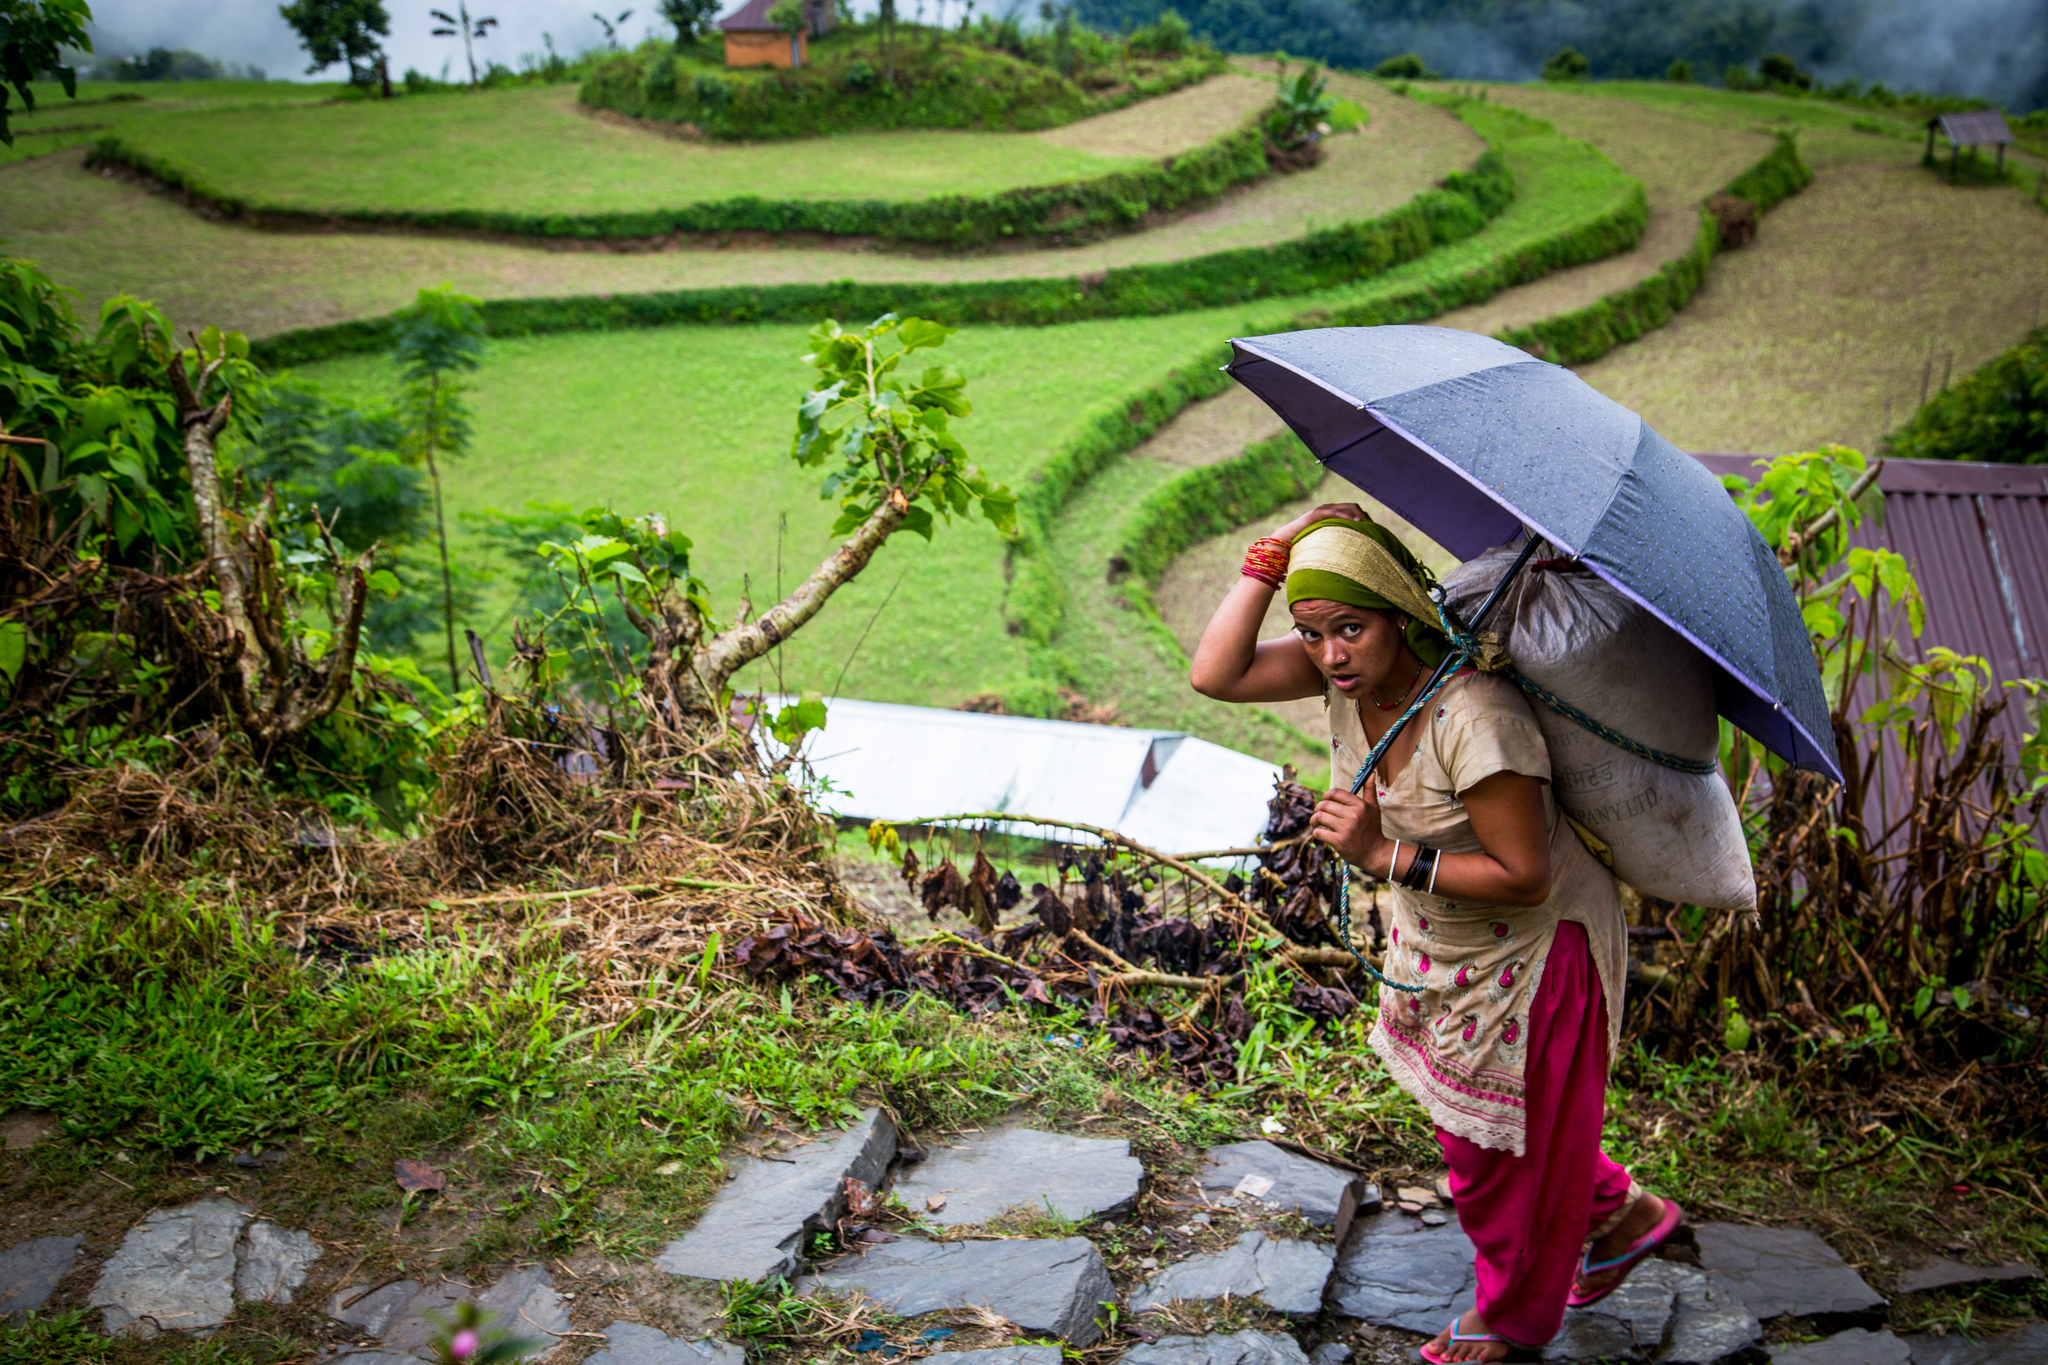 In the village of Nalma, Lamjung District, Nepal, most of the adult male population has gone abroad for work, leaving only children, women and the elderly. (Photo: Mokhamad Edliadi/CIFOR)